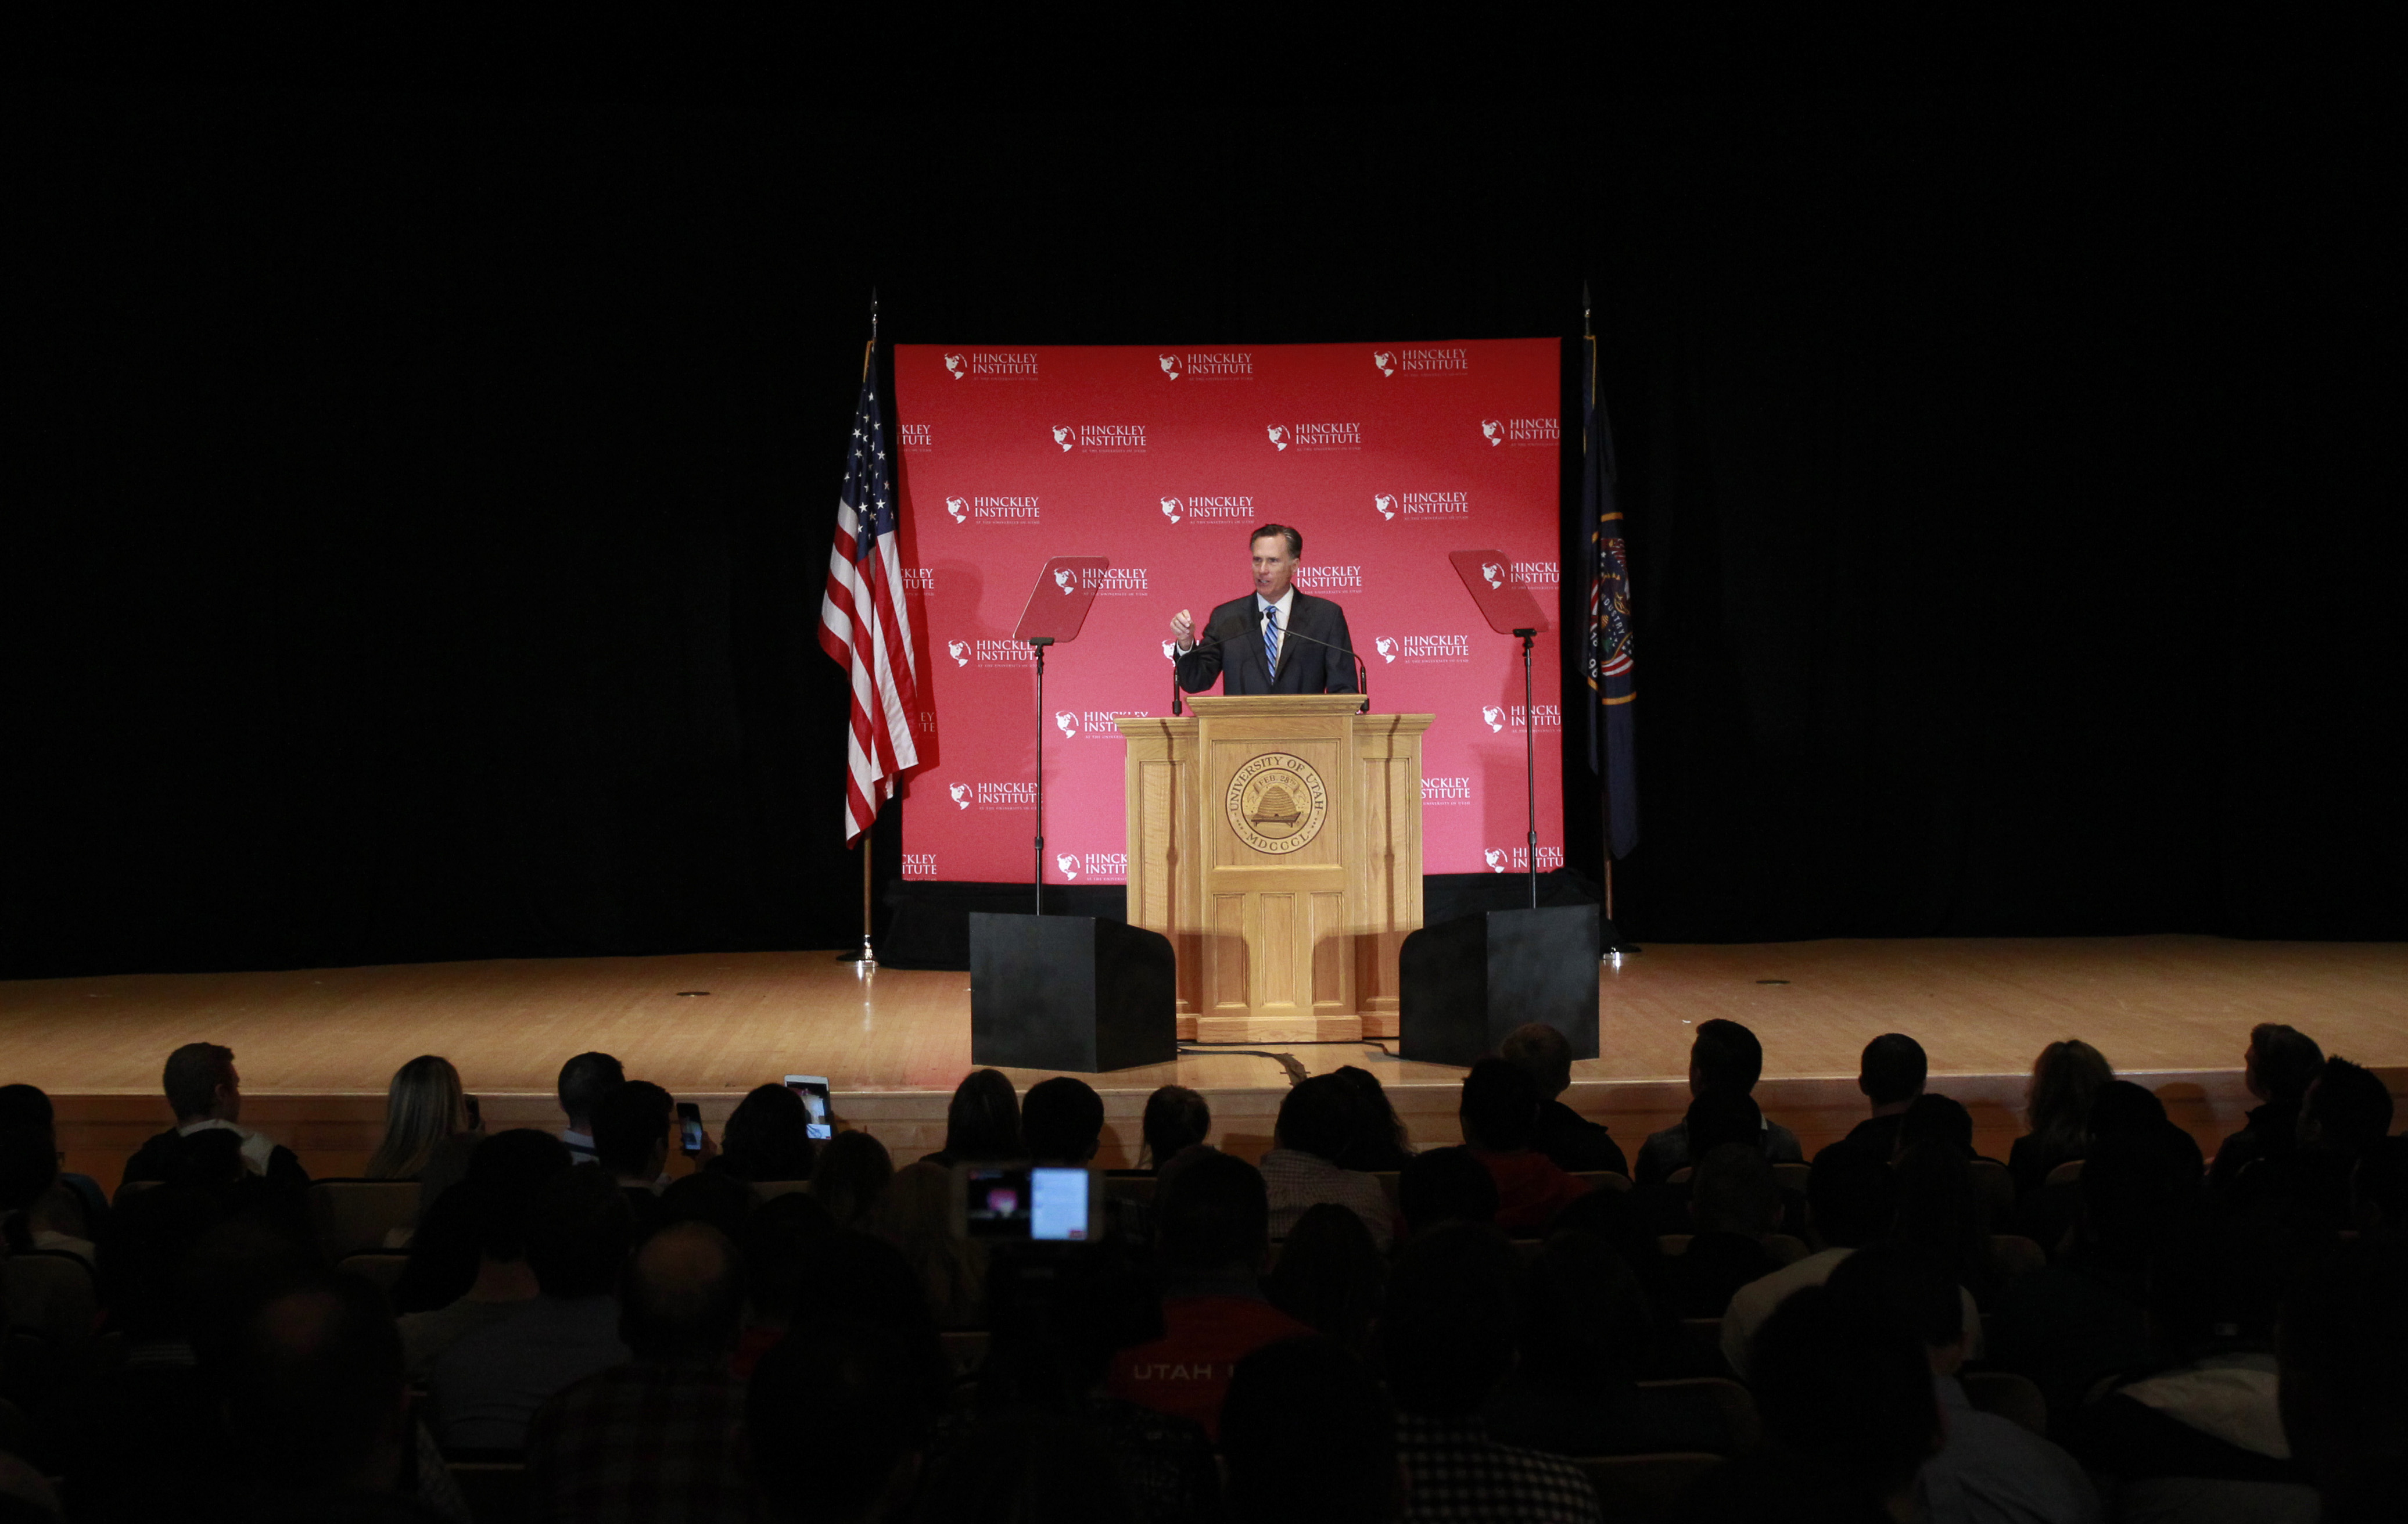 SALT LAKE CITY, UT - MARCH 3: Former Massachusetts Gov. Mitt Romney gives a speech on the state of the Republican party at the Hinckley Institute of Politics on the campus of the University of Utah on March 3, 2016 in Salt Lake City, Utah. Romney spoke about Donald Trump calling him a fraud and arguing against his nomination. (Photo by George Frey/Getty Images) 